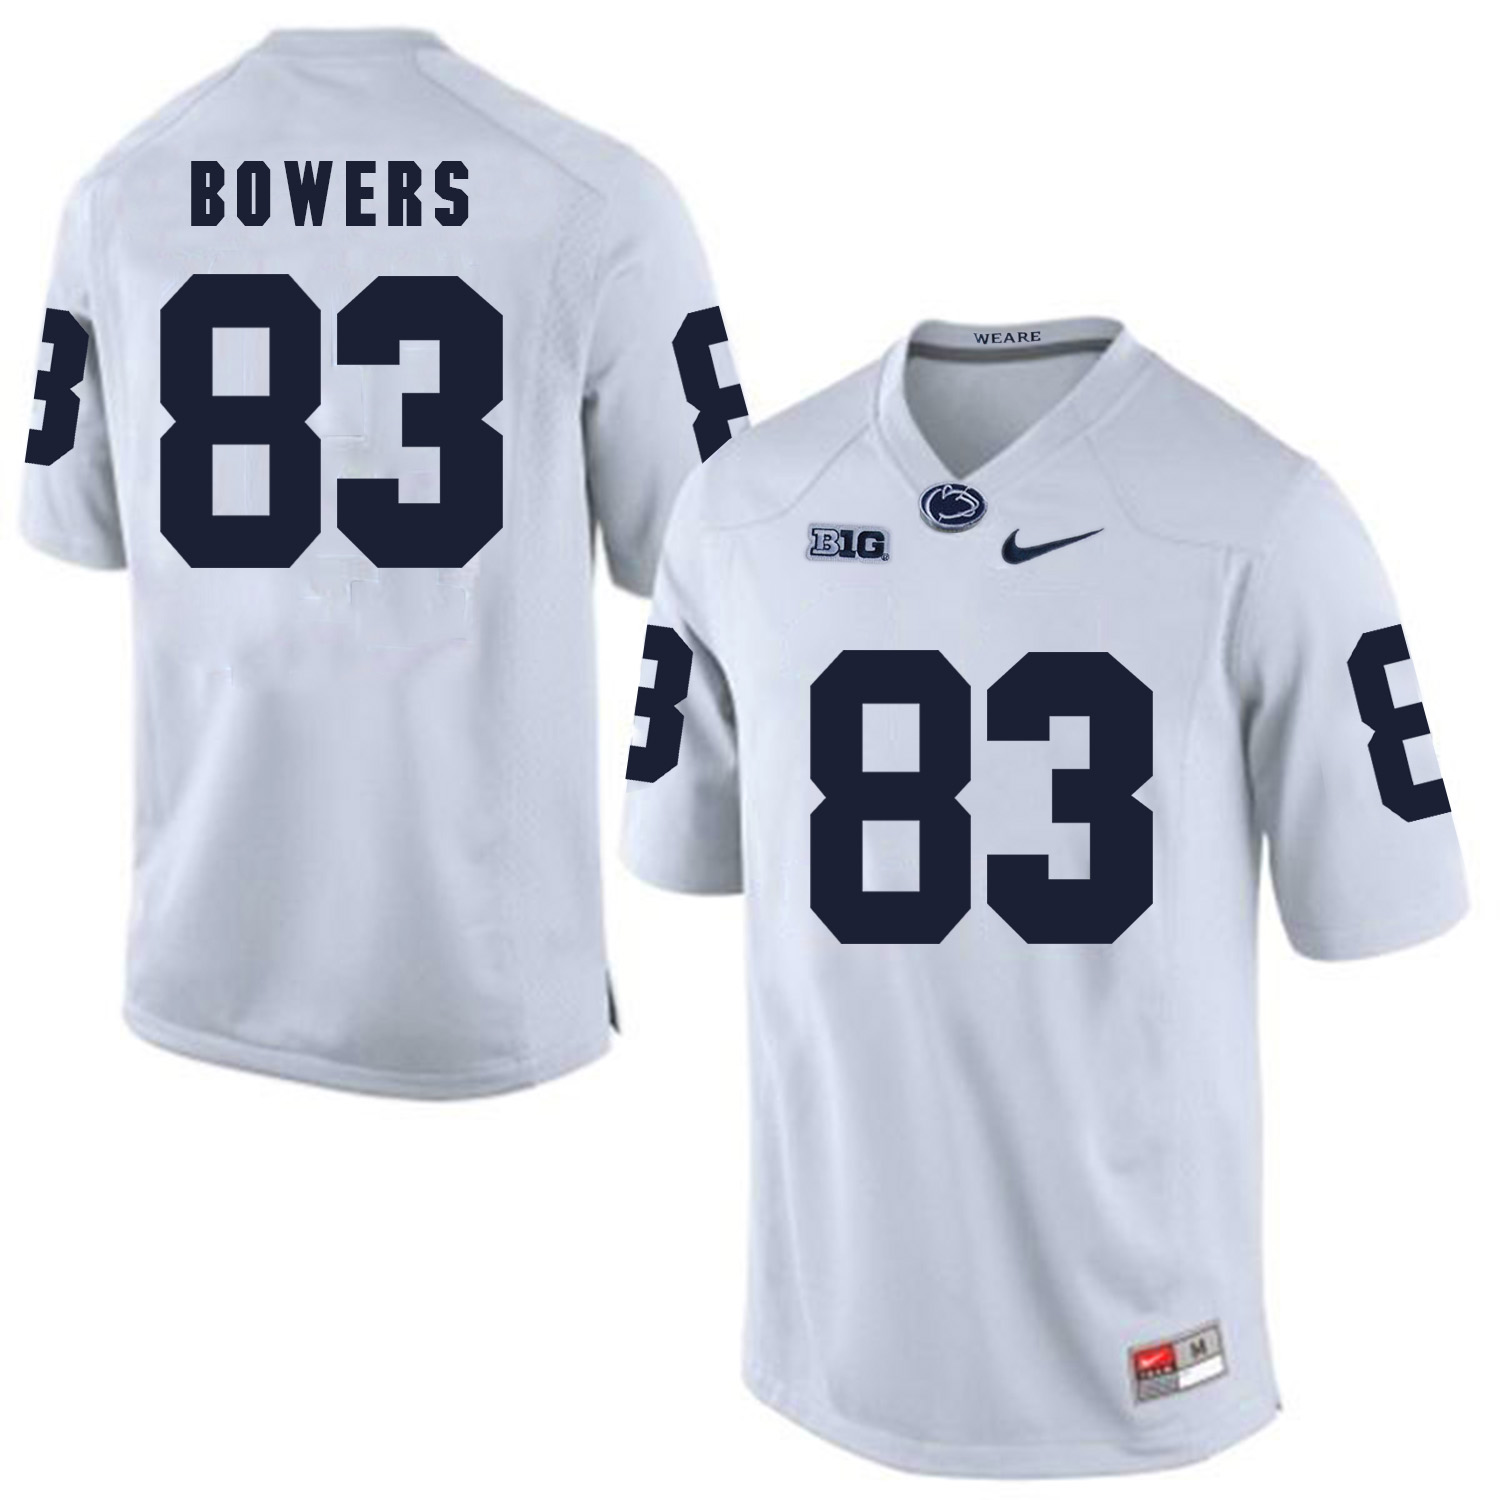 Penn State Nittany Lions 83 Nick Bowers White College Football Jersey